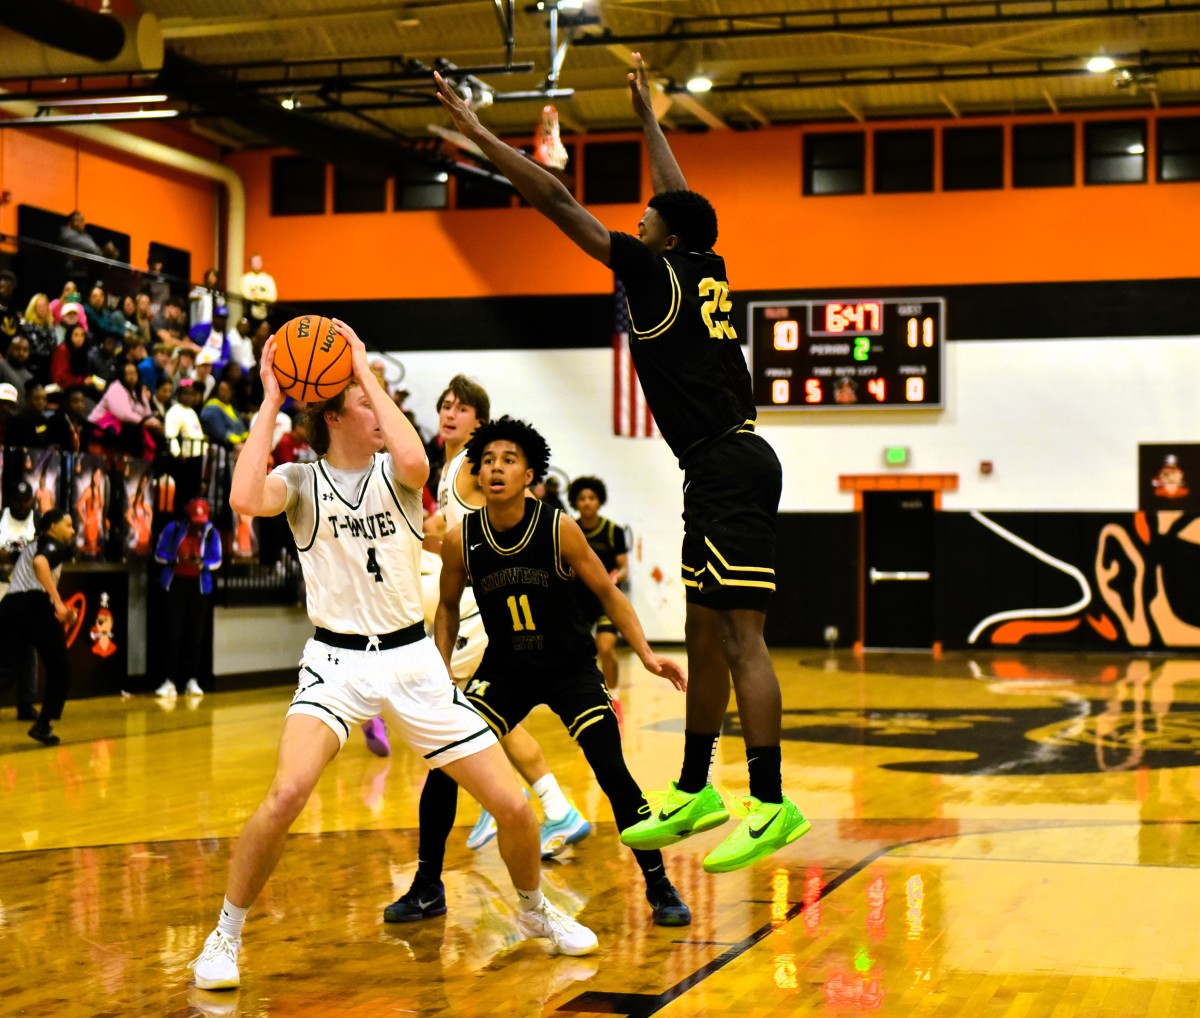 Midwest City players (in black) heavily guard a Norman North player during the championship game of the Putnam City Invitational tournament on Jan. 6, 2023.